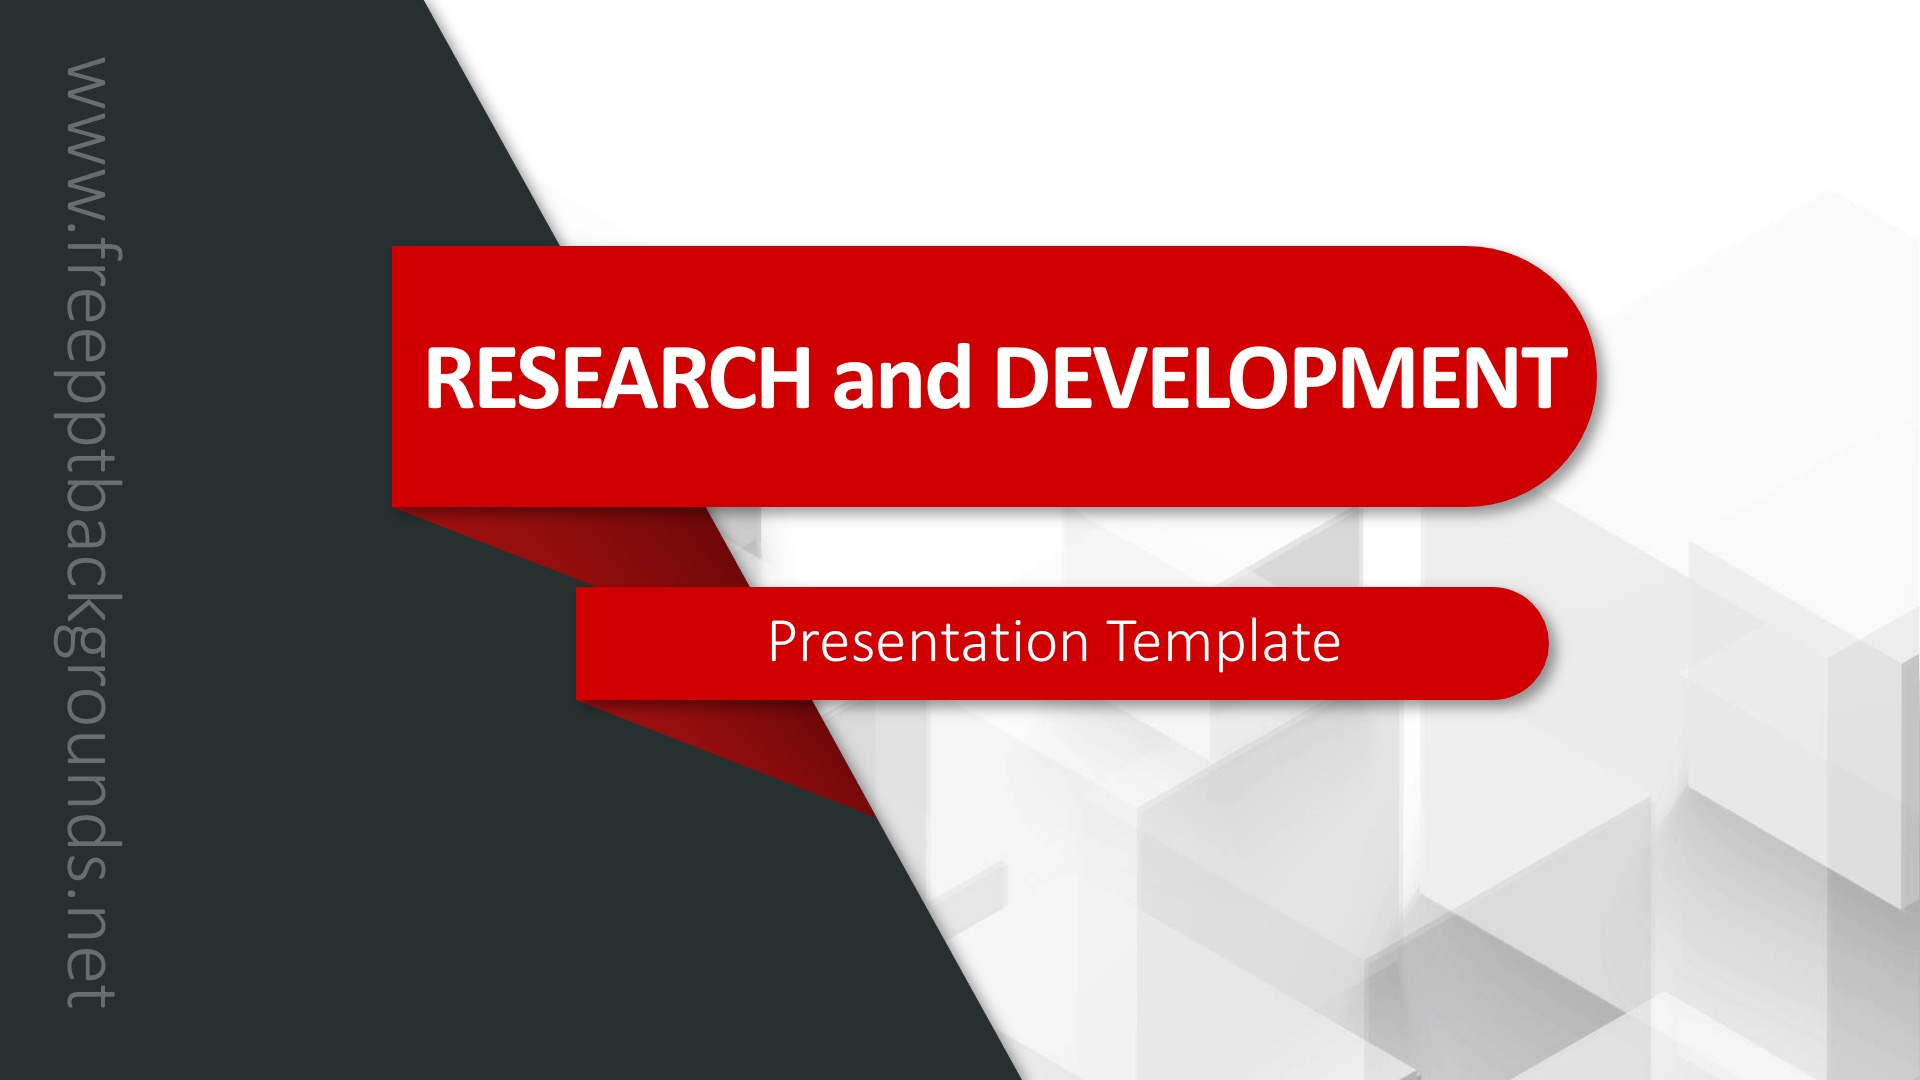 Research and Development Powerpoint Templates - Business & Finance,  Technologies - Free PPT Backgrounds and Templates